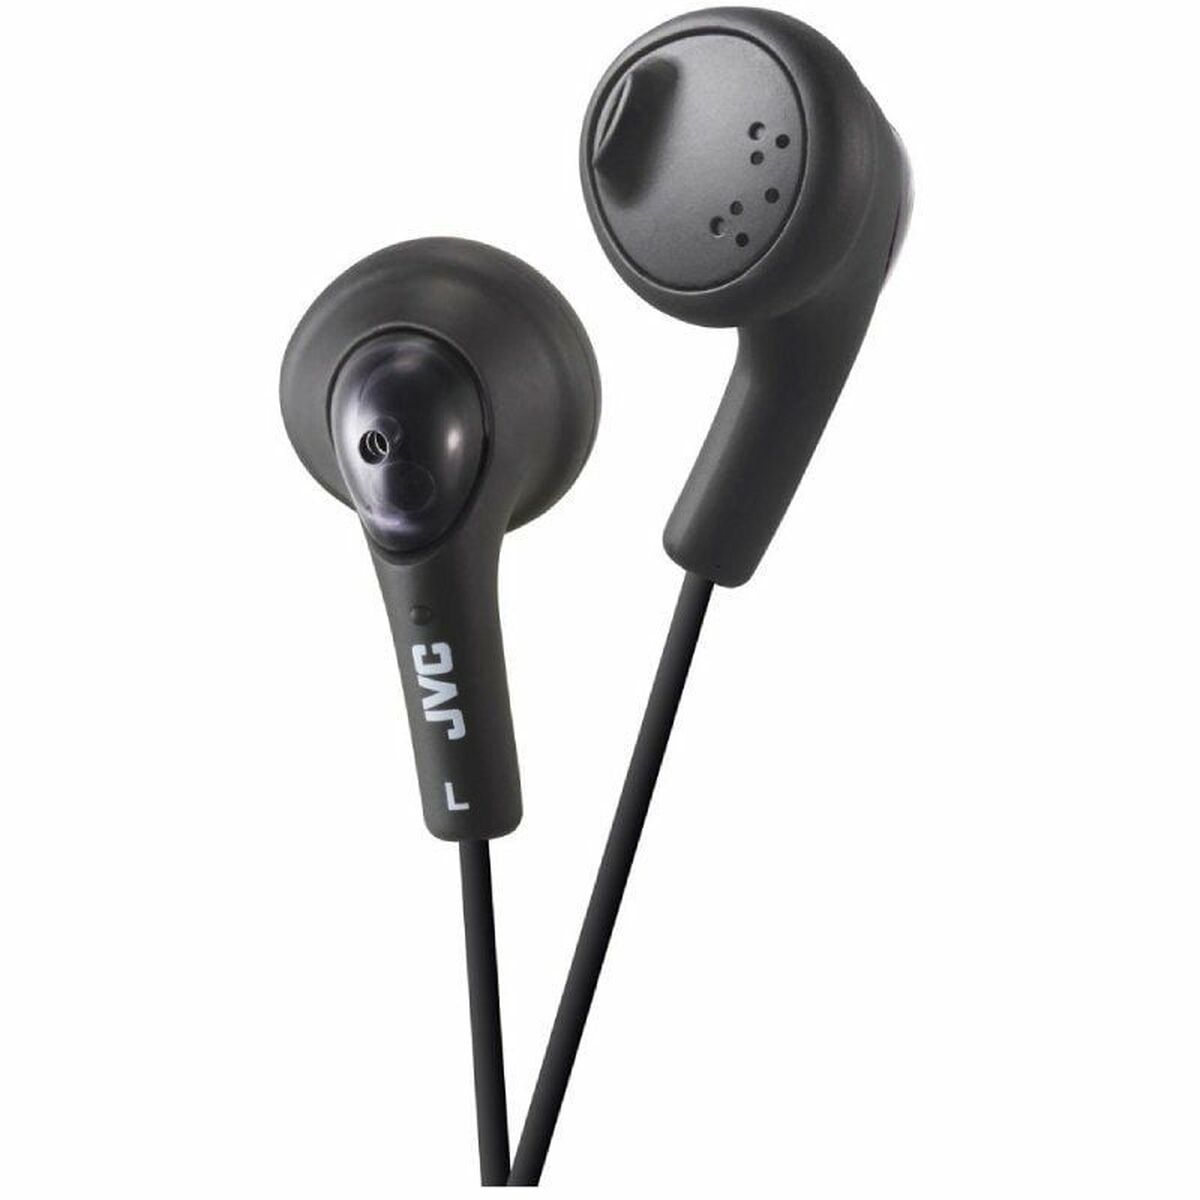 Headphones JVC HA-F160-B-E Black, JVC, Electronics, Mobile communication and accessories, headphones-jvc-ha-f160-b-e-black, Brand_JVC, category-reference-2609, category-reference-2642, category-reference-2847, category-reference-t-19653, category-reference-t-21312, category-reference-t-25535, category-reference-t-4036, category-reference-t-4037, computers / peripherals, Condition_NEW, entertainment, music, office, Price_20 - 50, telephones & tablets, Teleworking, RiotNook